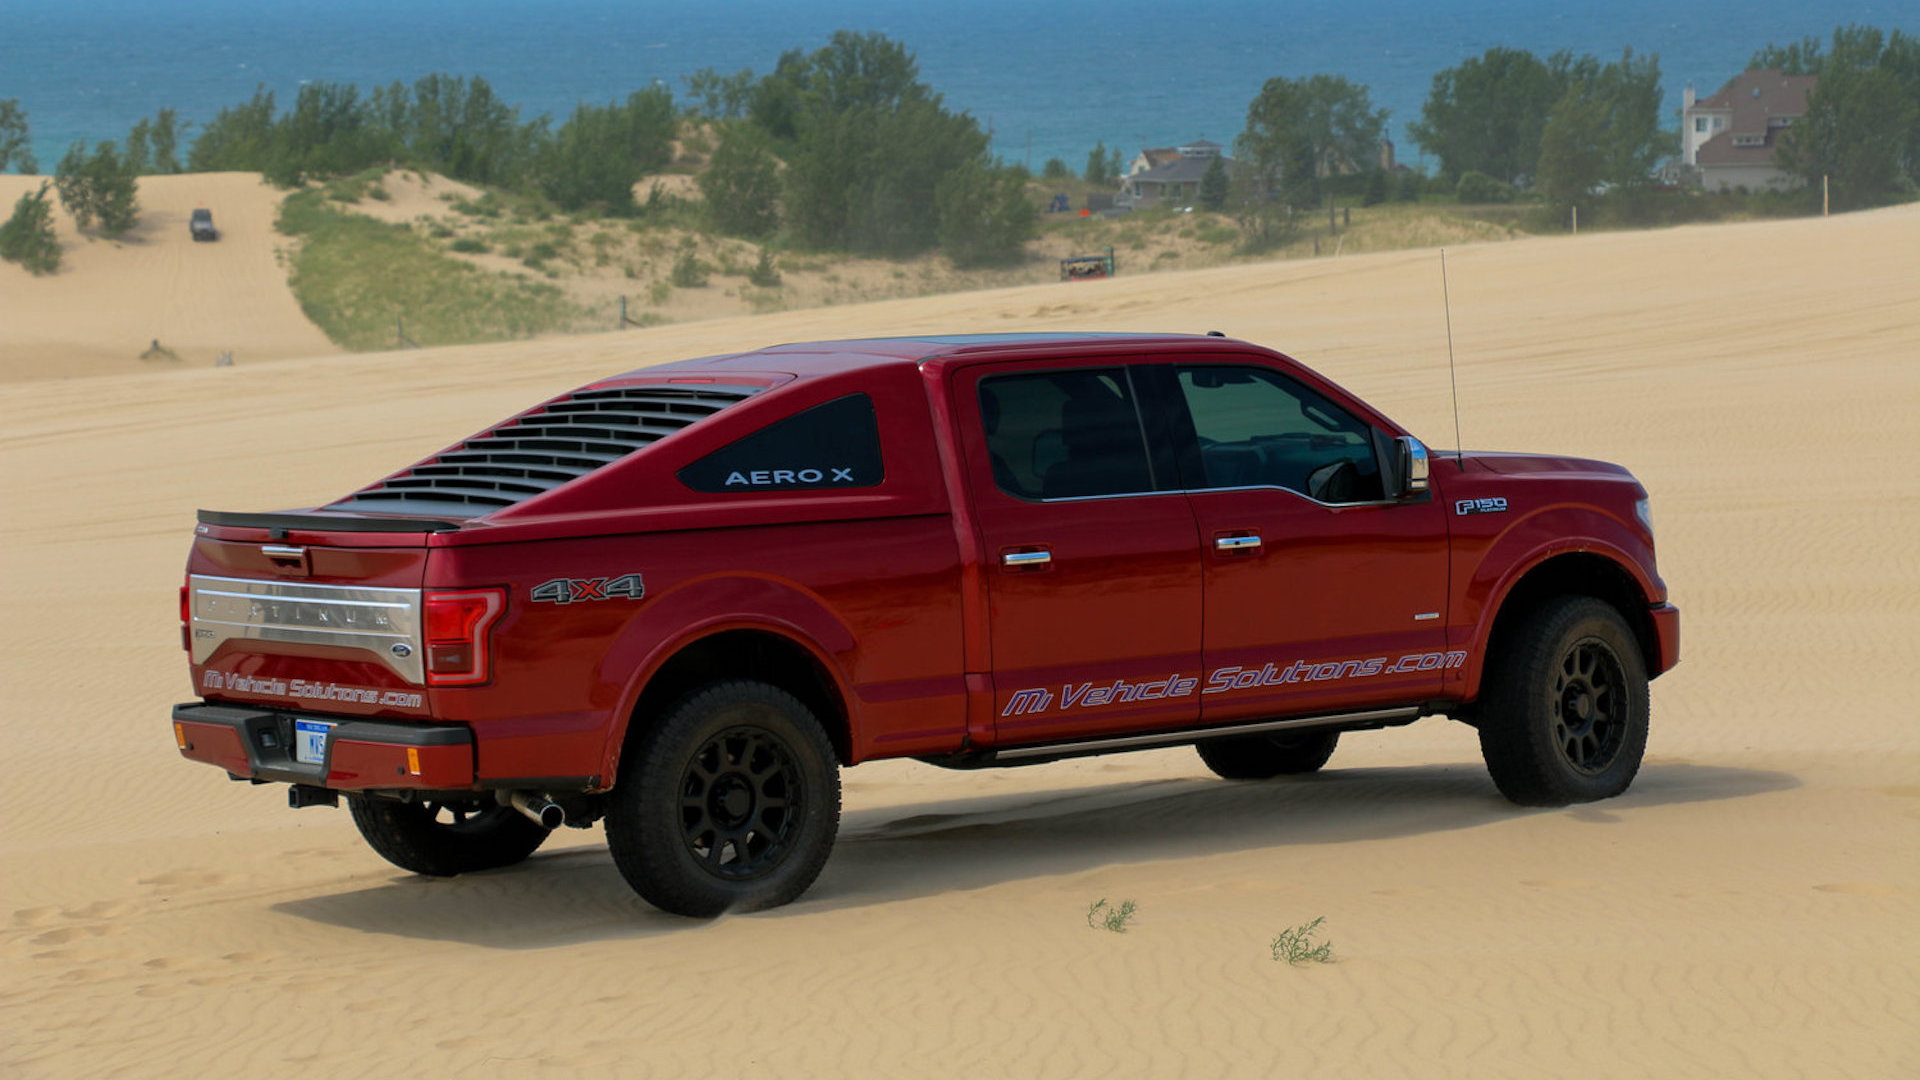 Mustang Fastback-inspired bed cap for Ford F-150, via Michigan Vehicle Solutions